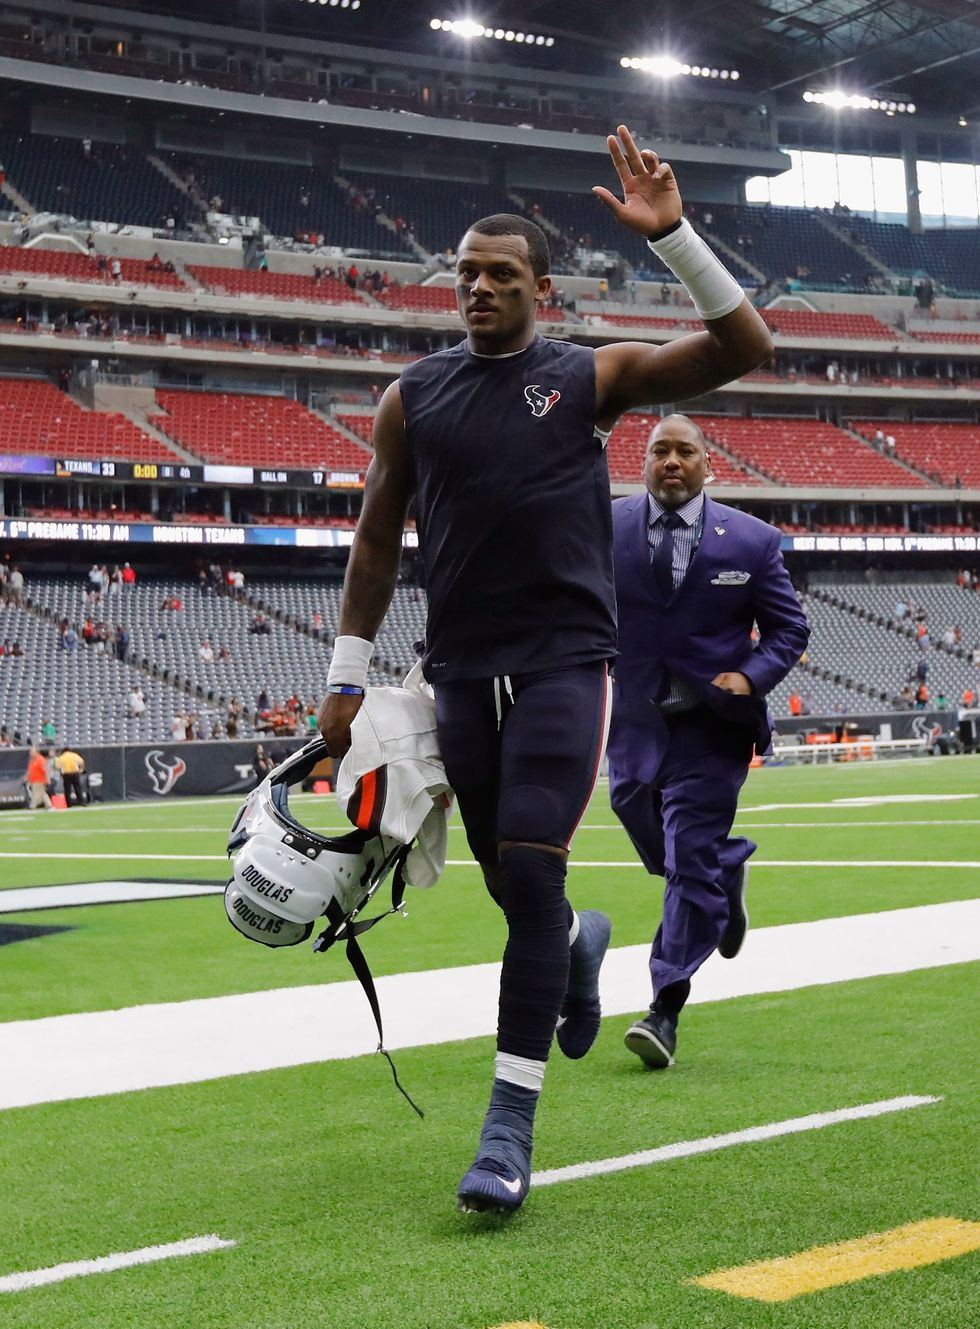 Jermaine Every: For Texans, all hope lies in Deshaun Watson